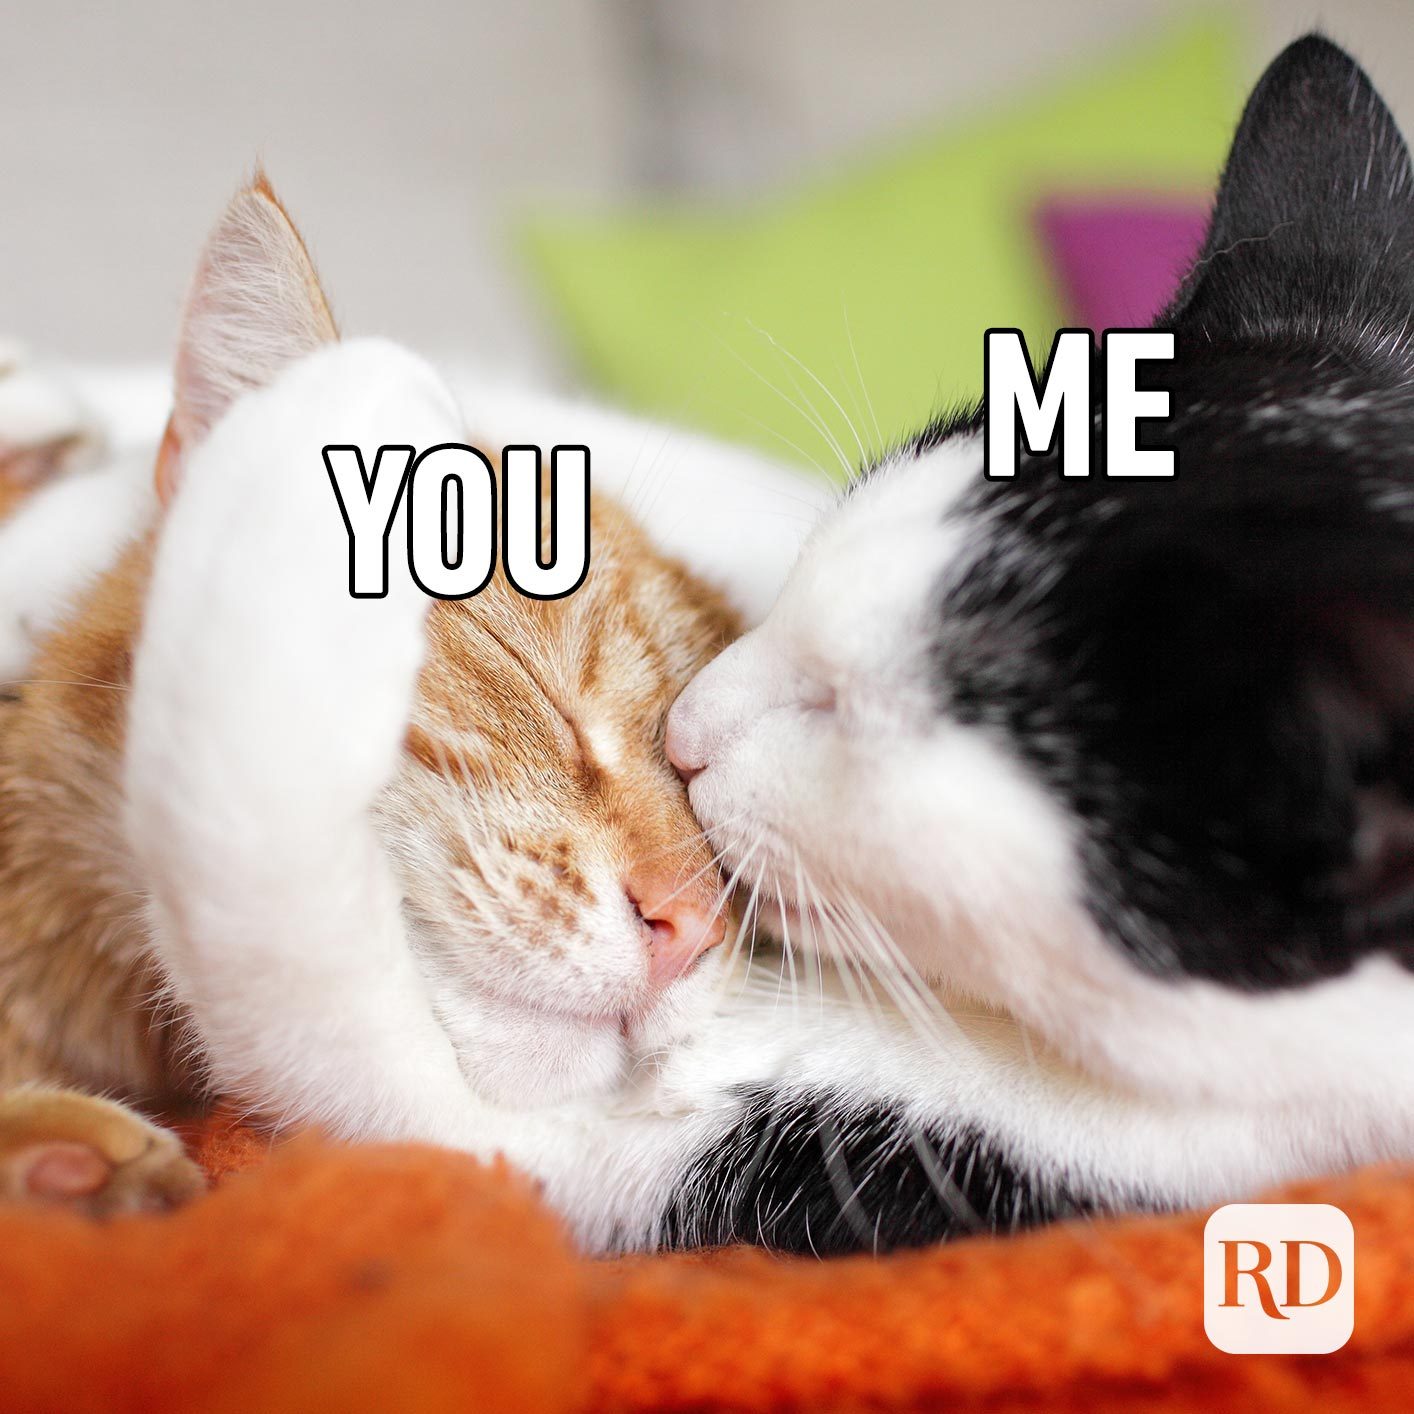 Two cats hugging. Meme text: You Me (have the You text over one cat and the Me over the other)